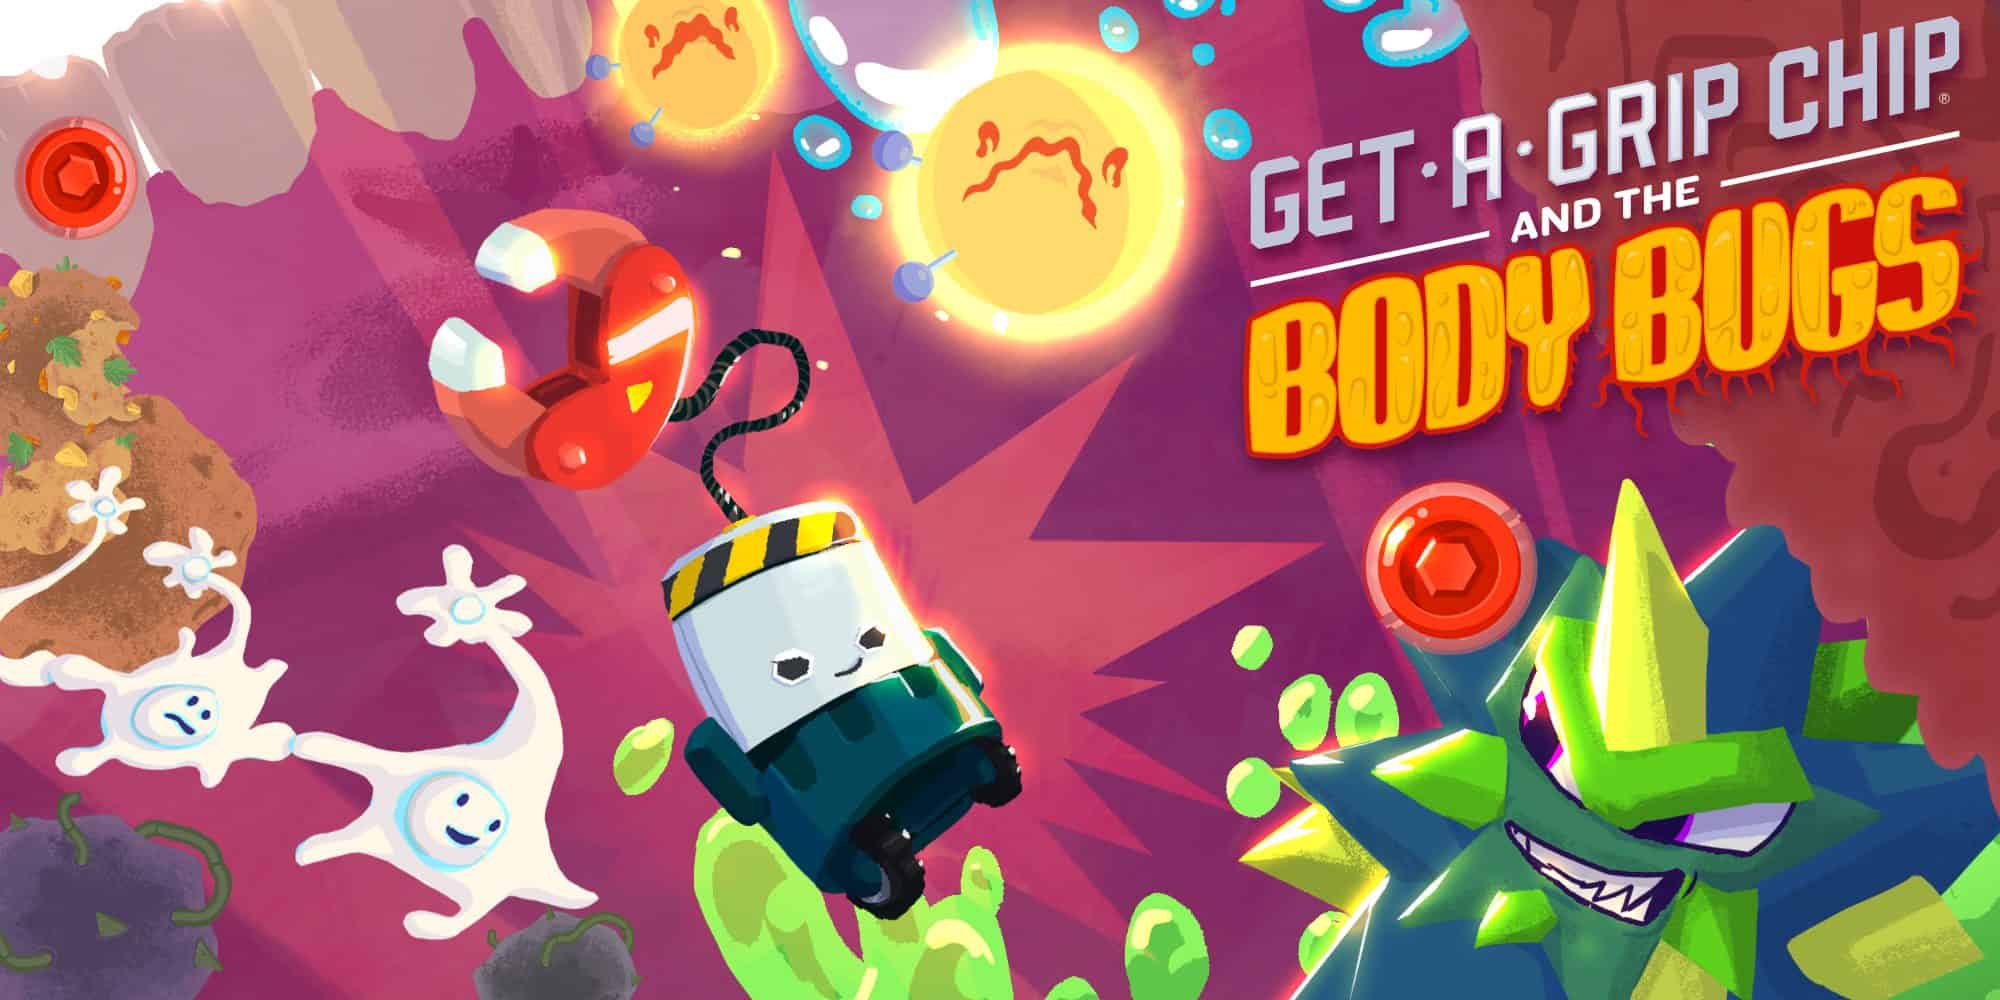 Get-a-Grip Chip and the Body Bugs game poster